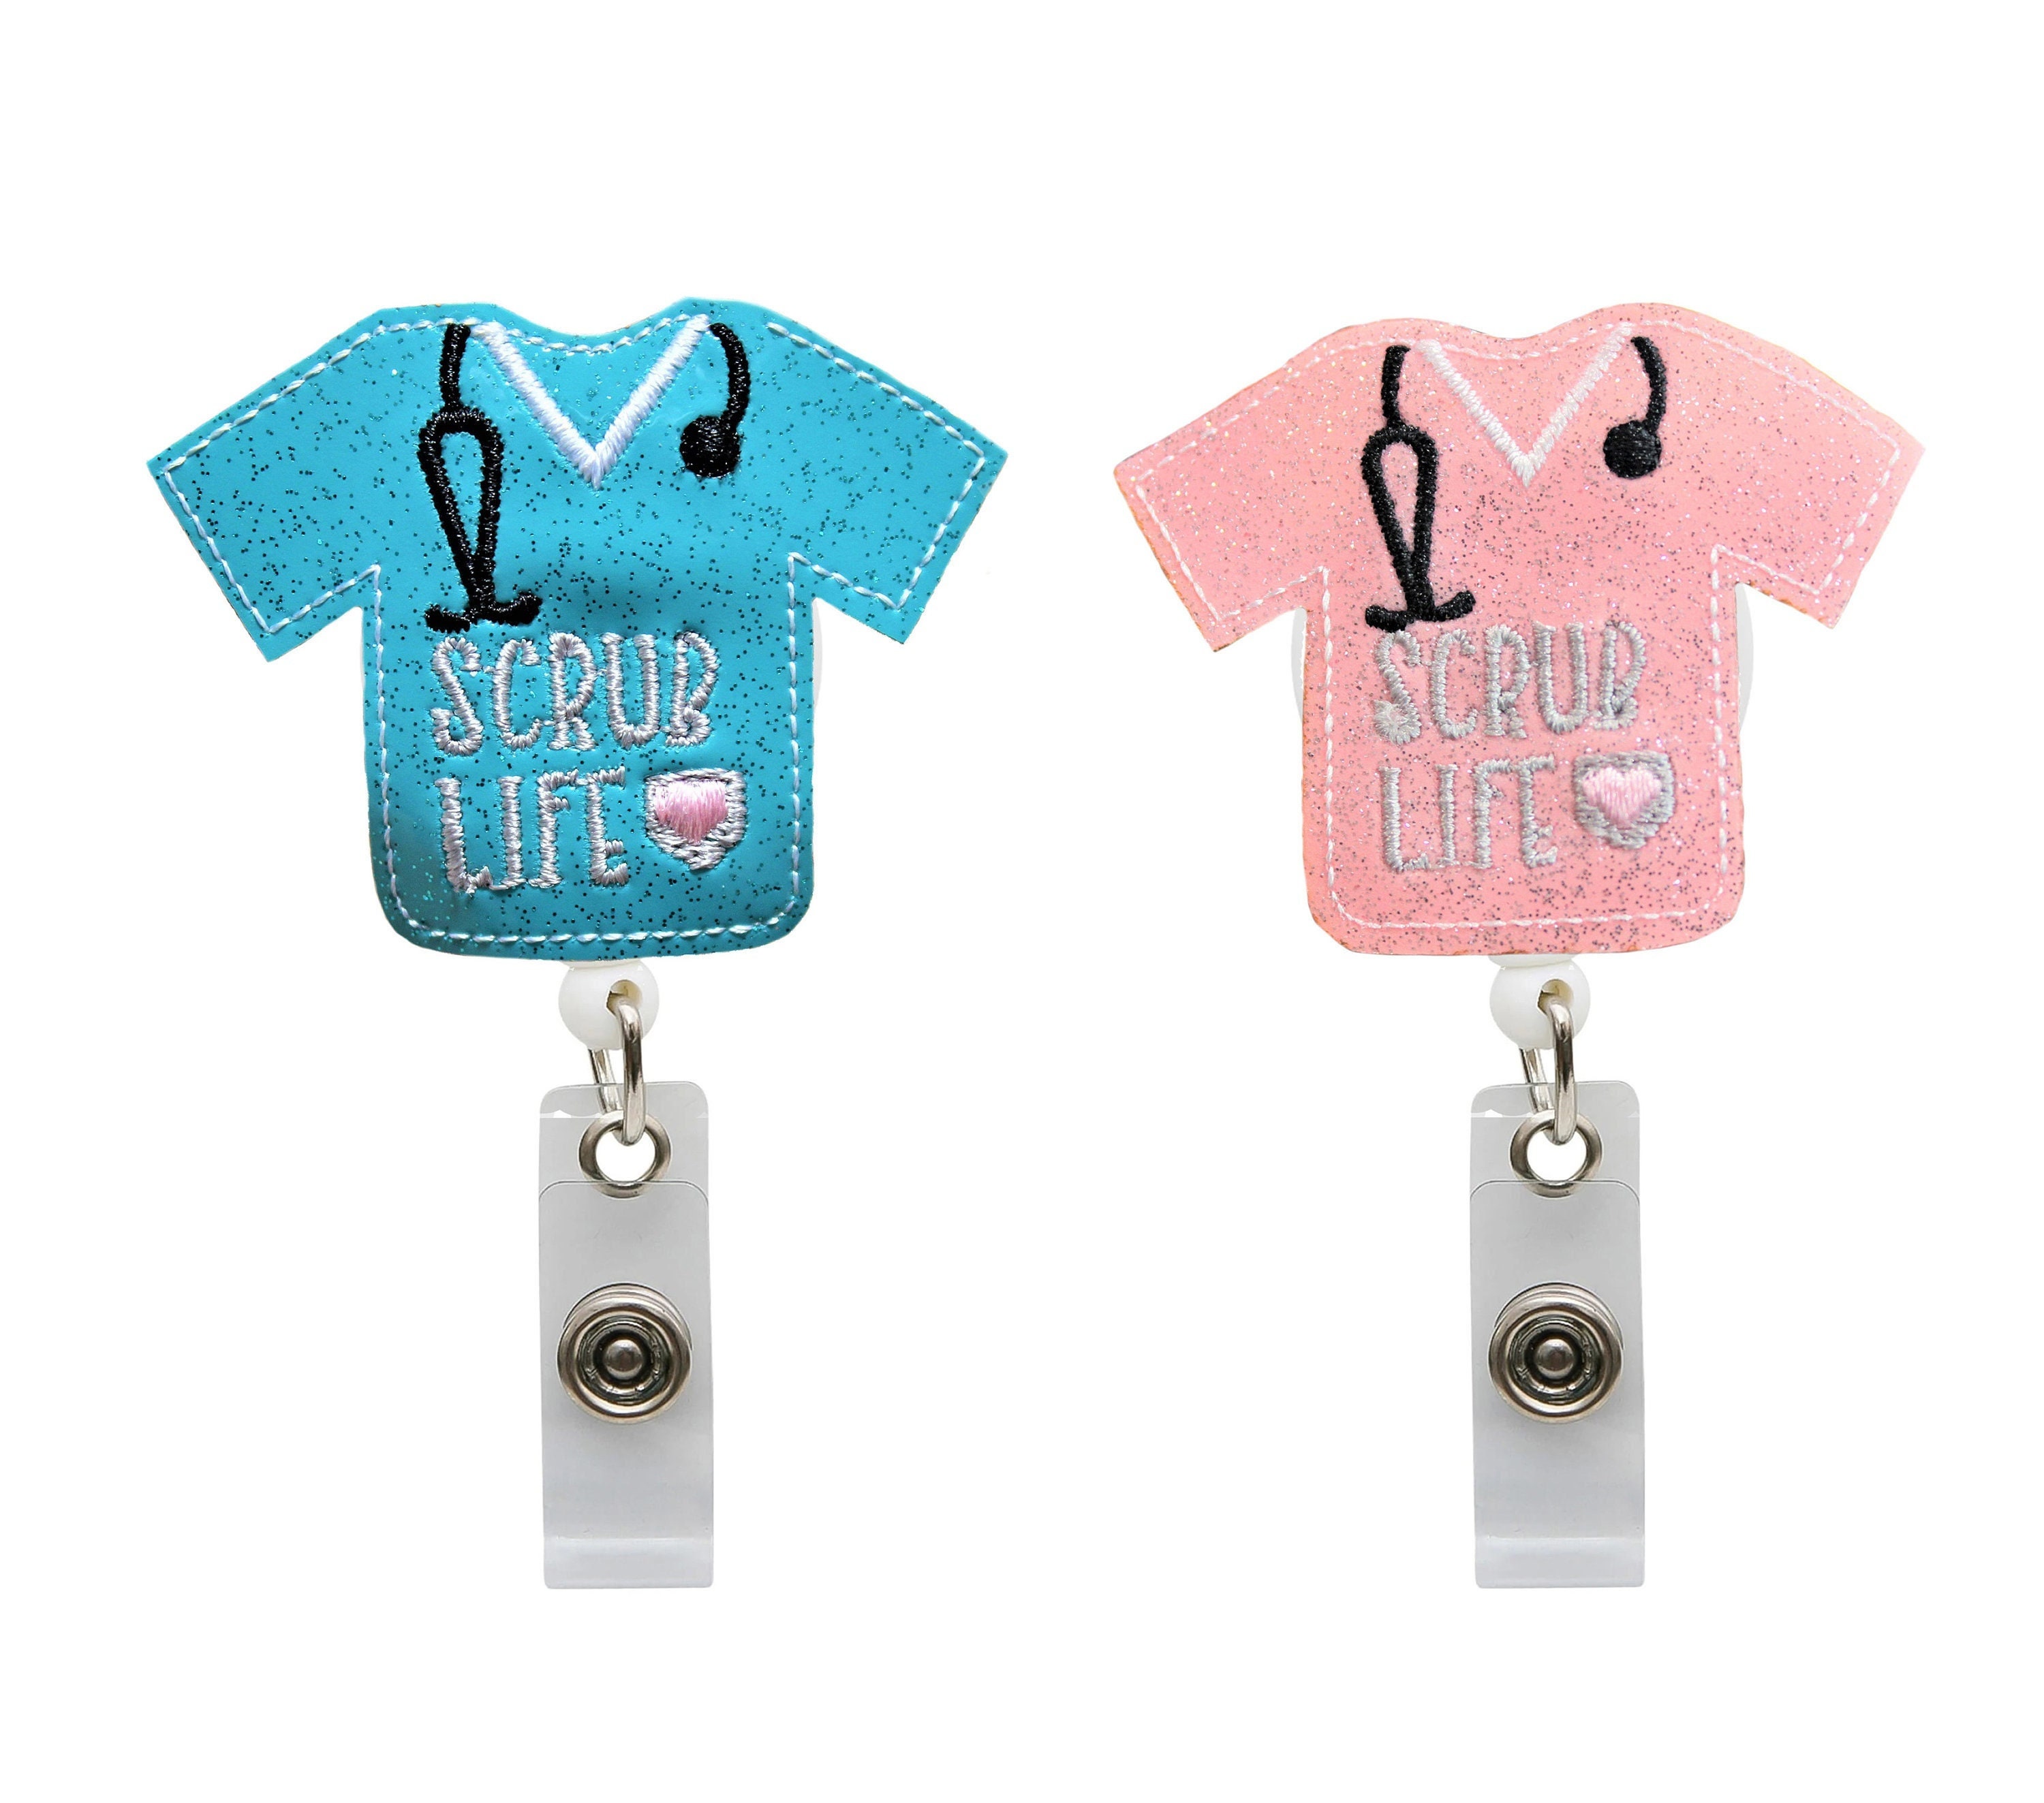 Glitter Scrub Life Nurse Badge Reels Retractable ID Holder for Hospitals  Doctors and Office Staff Show Your Fun Pride for Your Job -  Canada